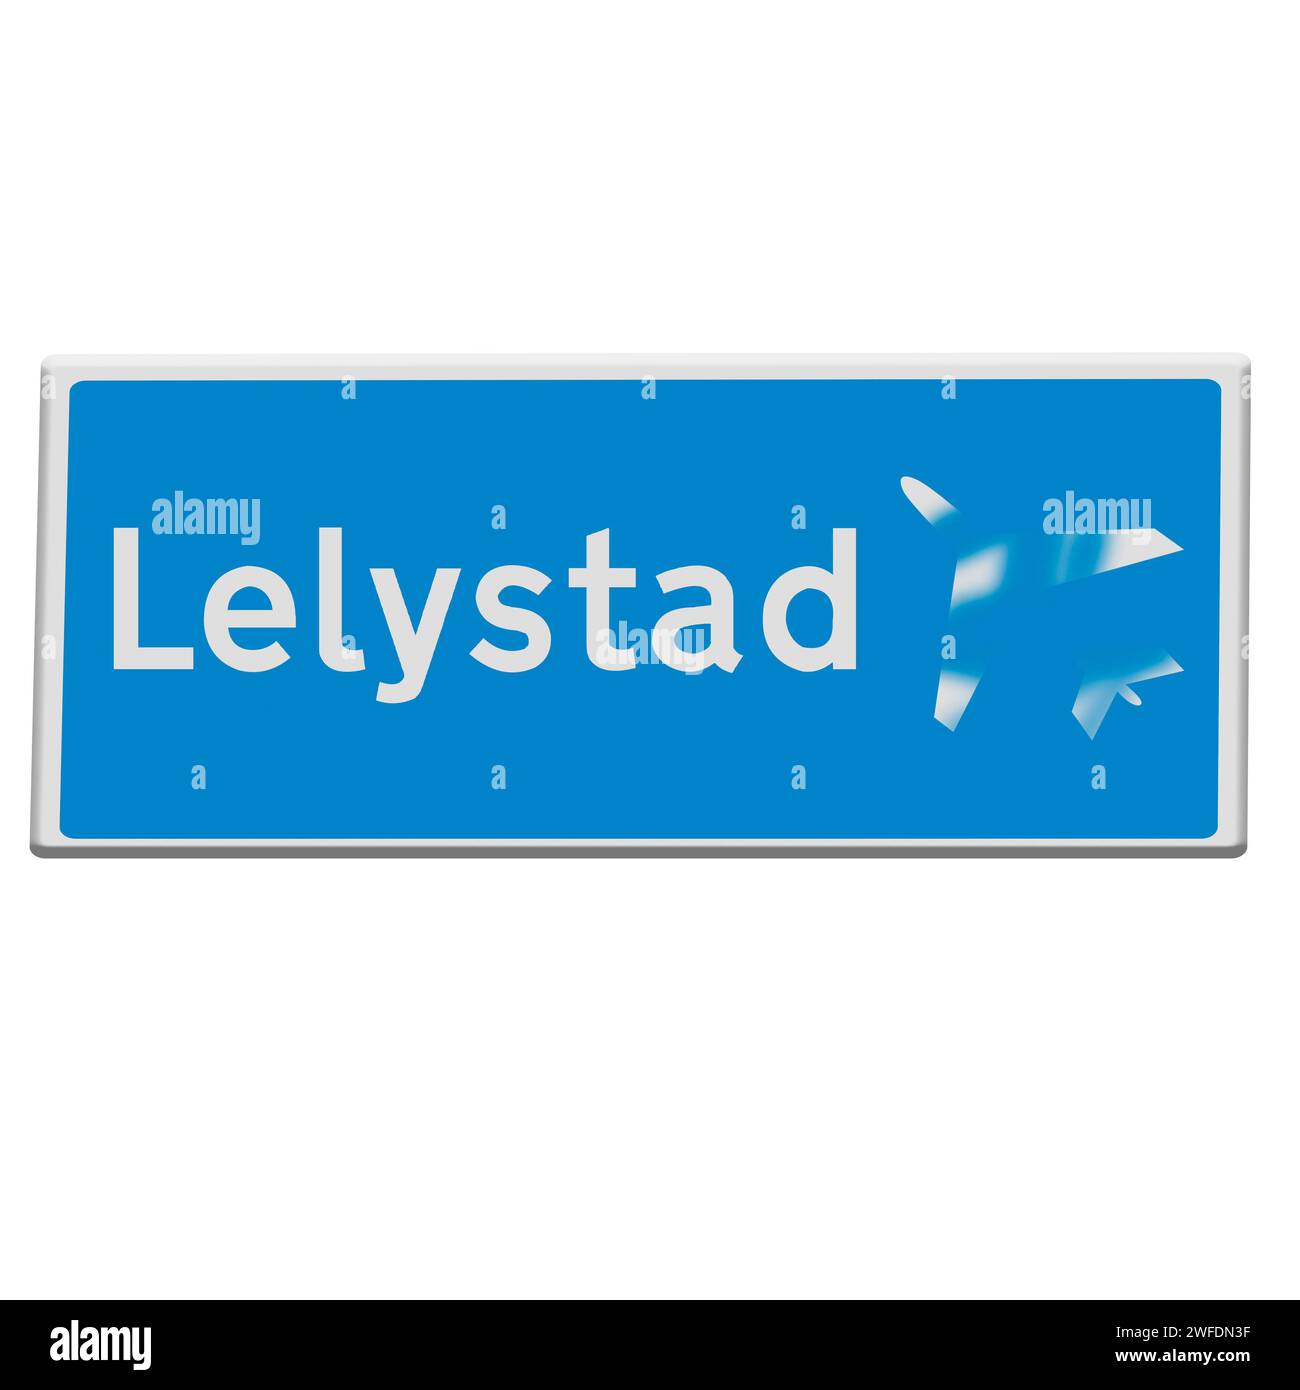 Amsterdam The Netherlands 30th January 2024 Digital illustration - Road sign for Lelystad airport with the aircraft sprayed over. Today a majority of the lower house of the Dutch parliament voted for a motion to stop plans for commercial aviation at Lelystad airport. The airport has long been a political hot potato with plans to open it to take holiday flights to relieve congestion at nearby Schiphol. Stock Photo